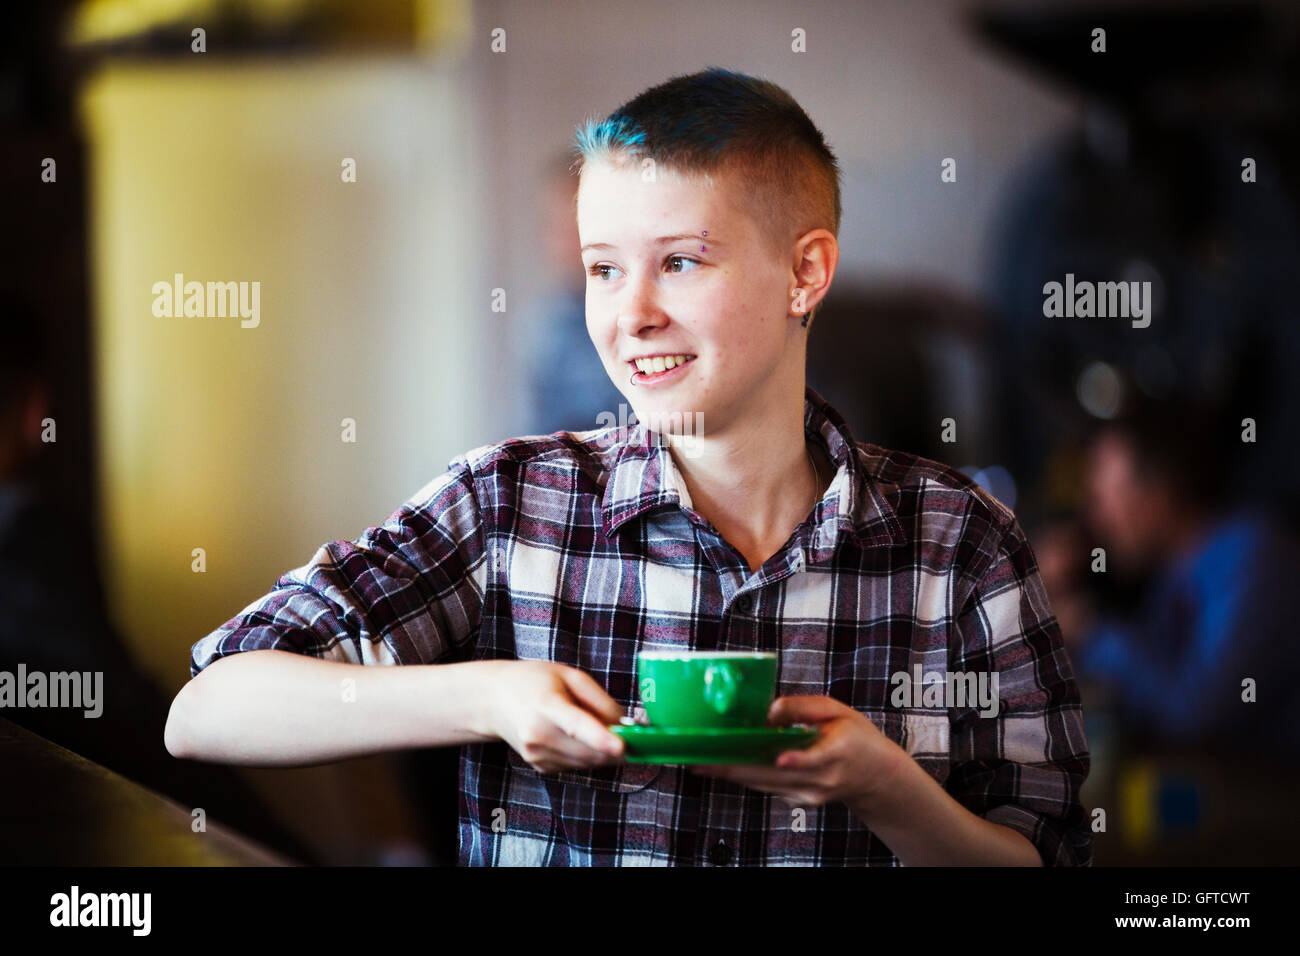 A young person carrying a cup of coffee Stock Photo